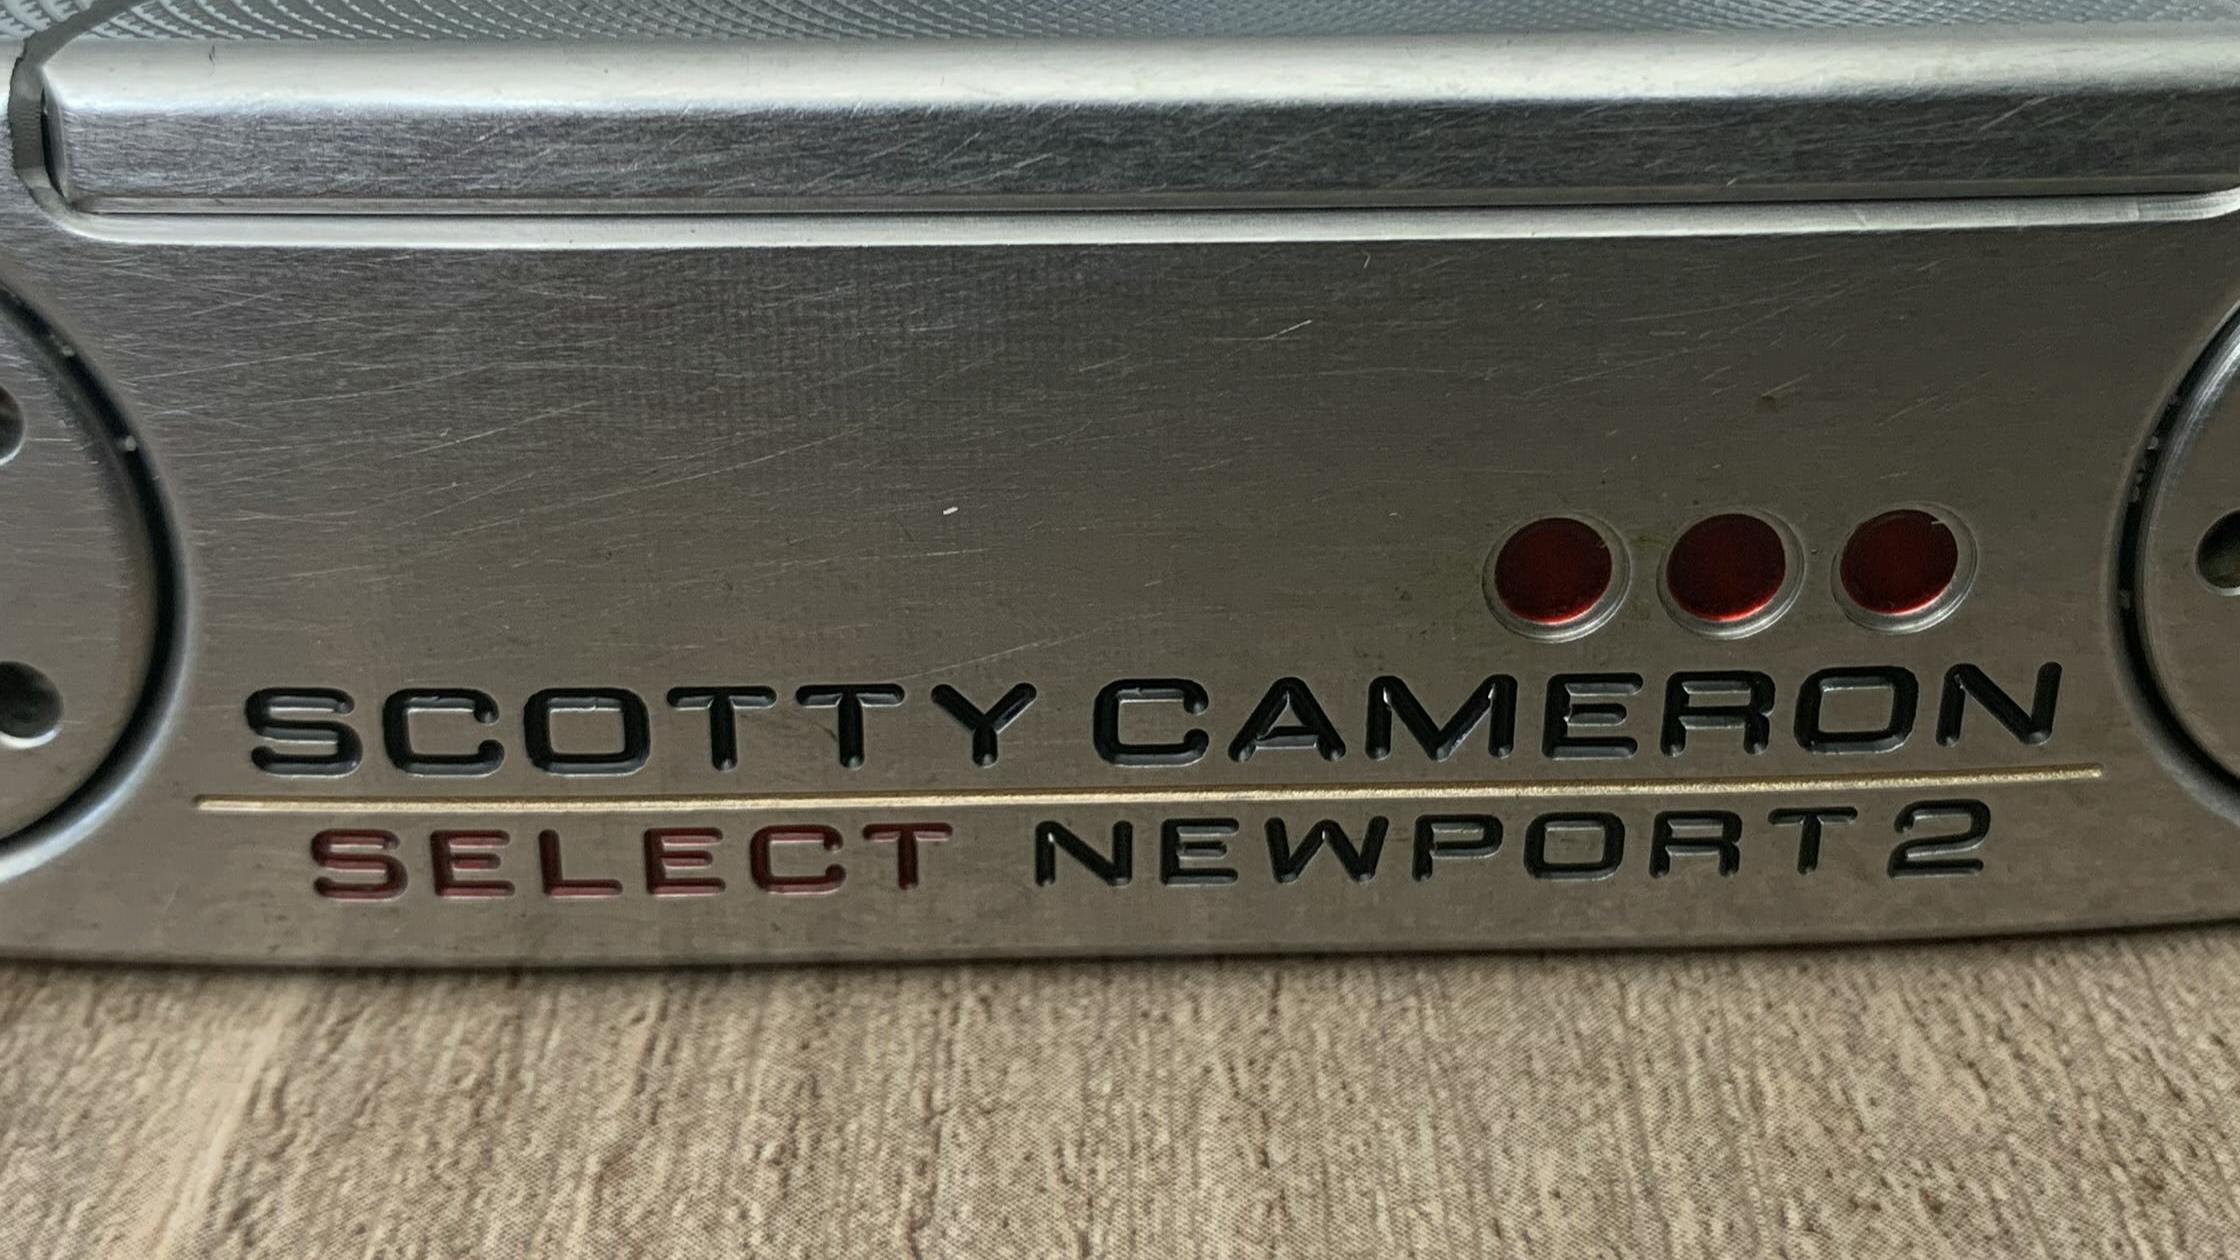 Bottom of the Scotty Cameron Special Select Newport 2 Putter.